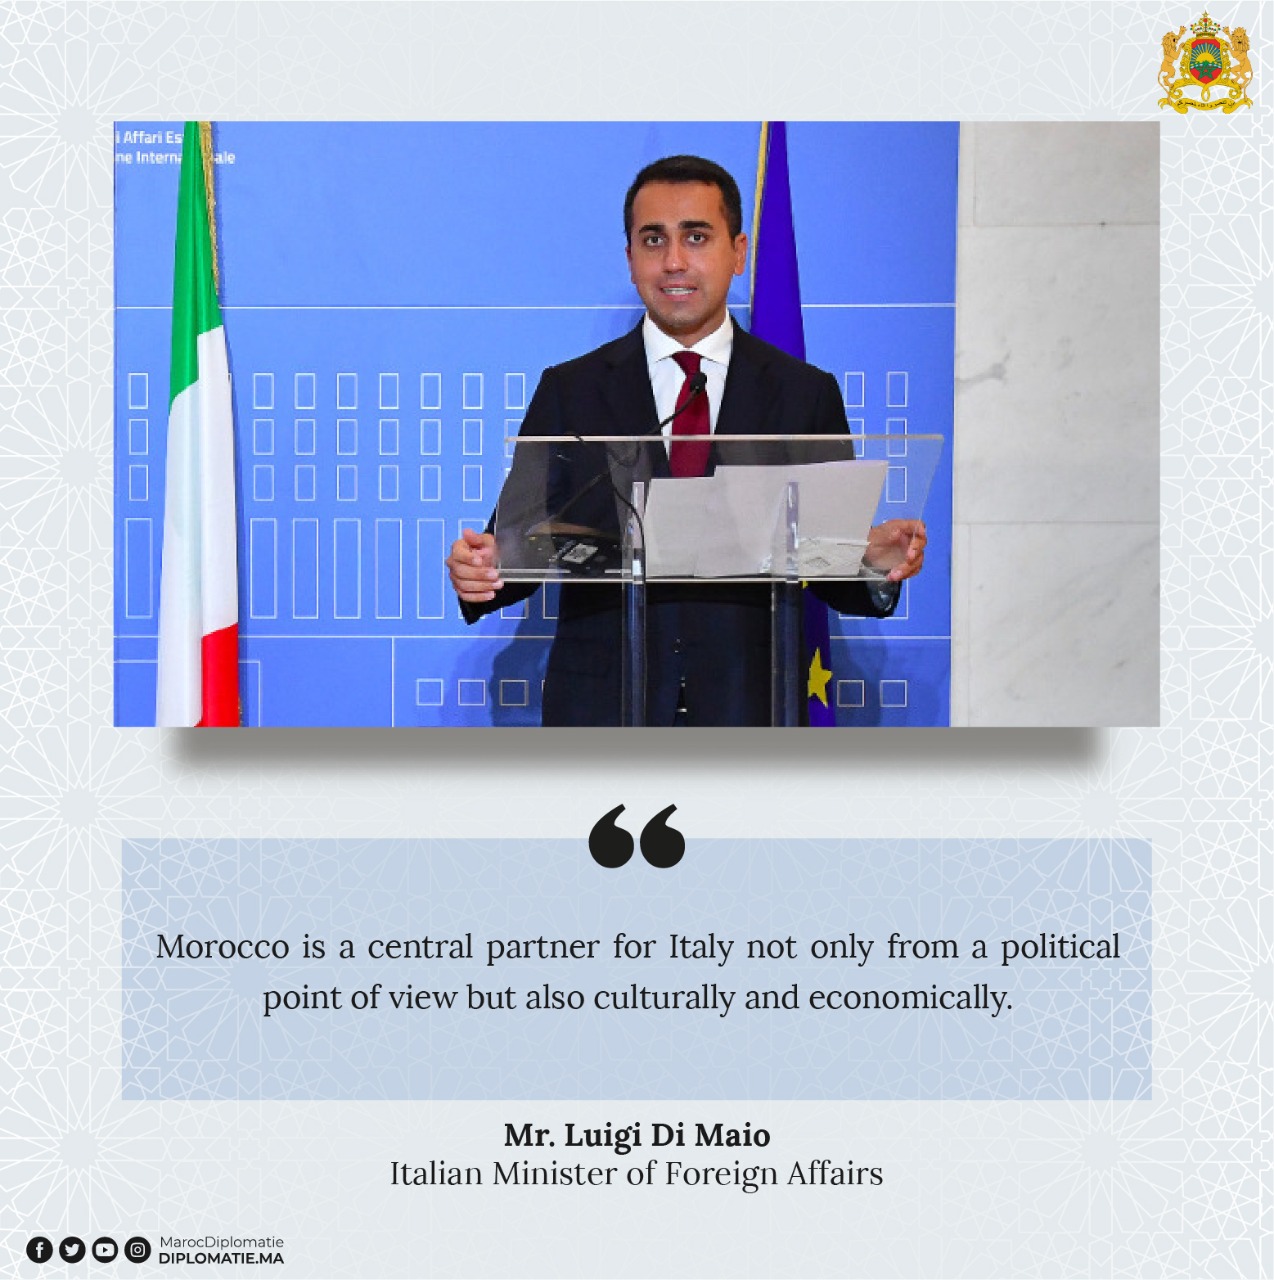 Statement made by Mr. Luigi Di Maio, Italian Minister of Foreign Affairs